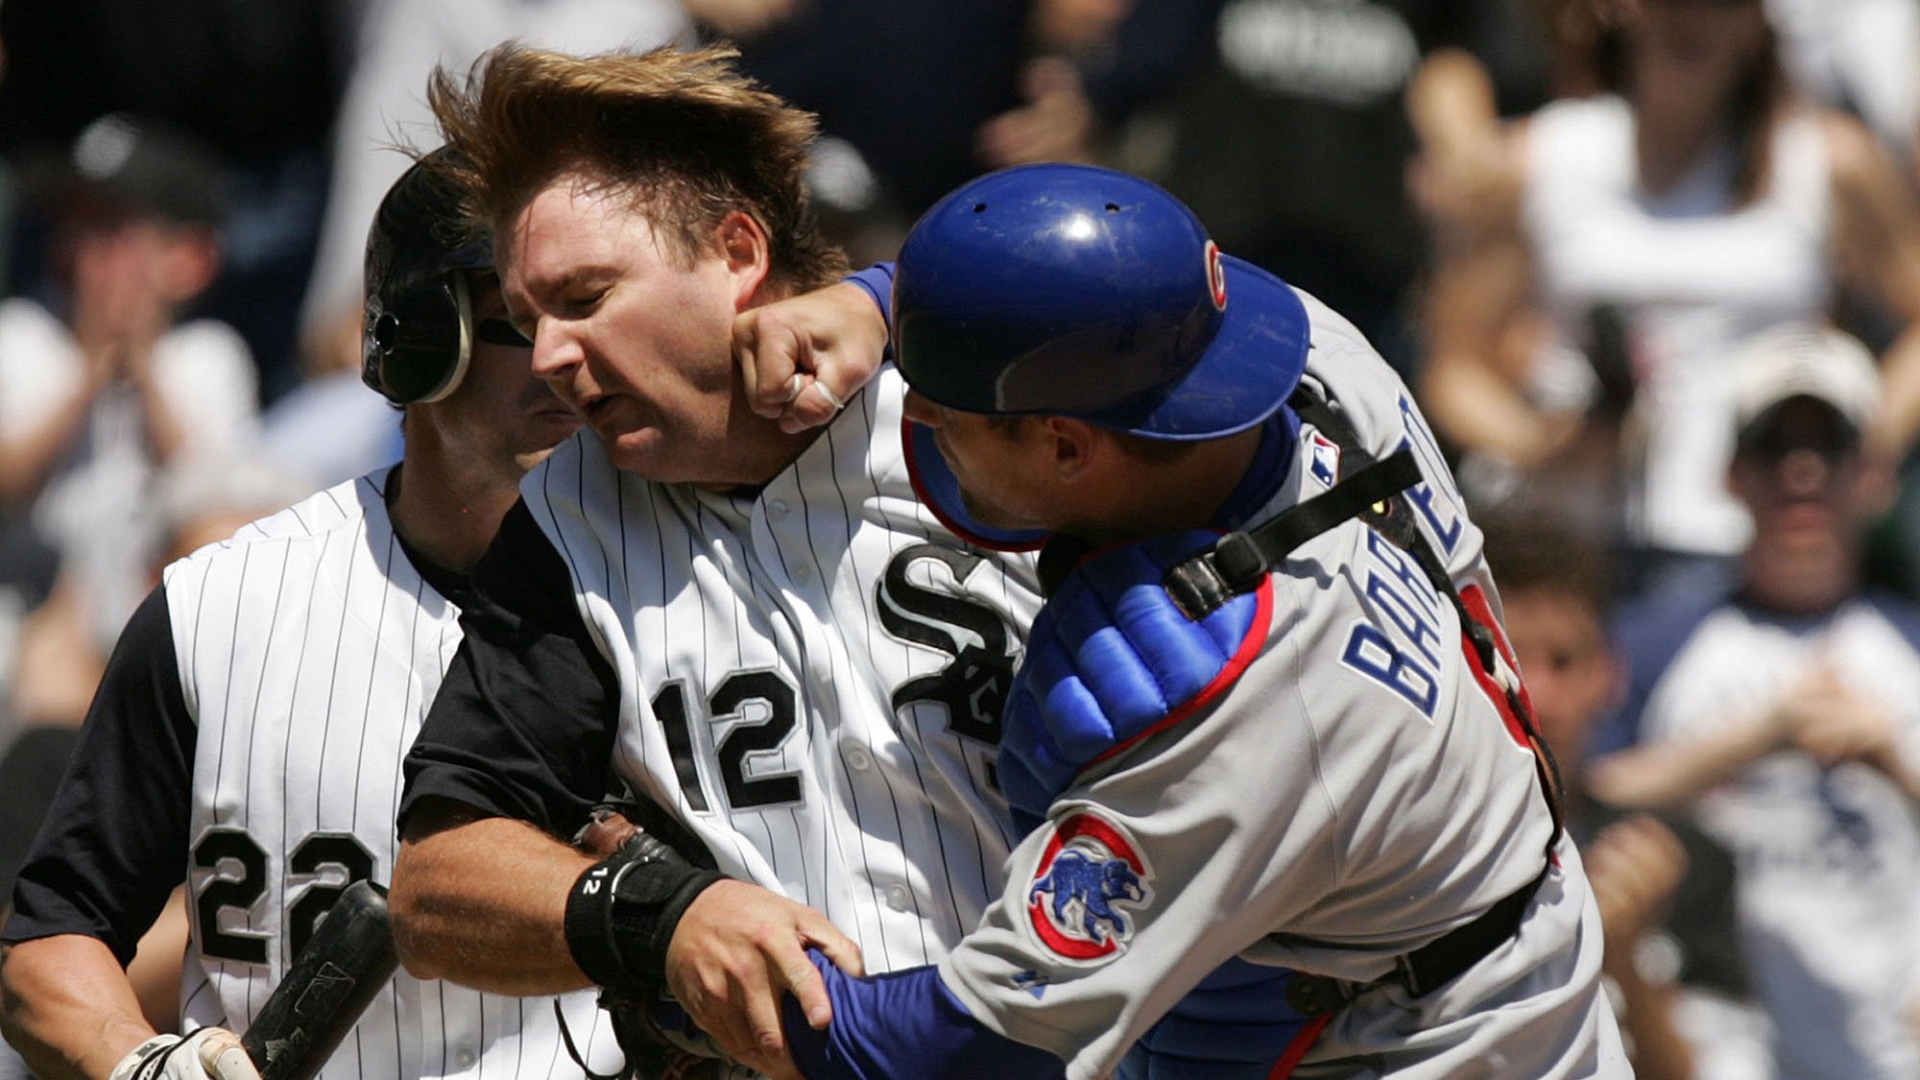 City Series: Ranking top moments in Cubs vs. White Sox history